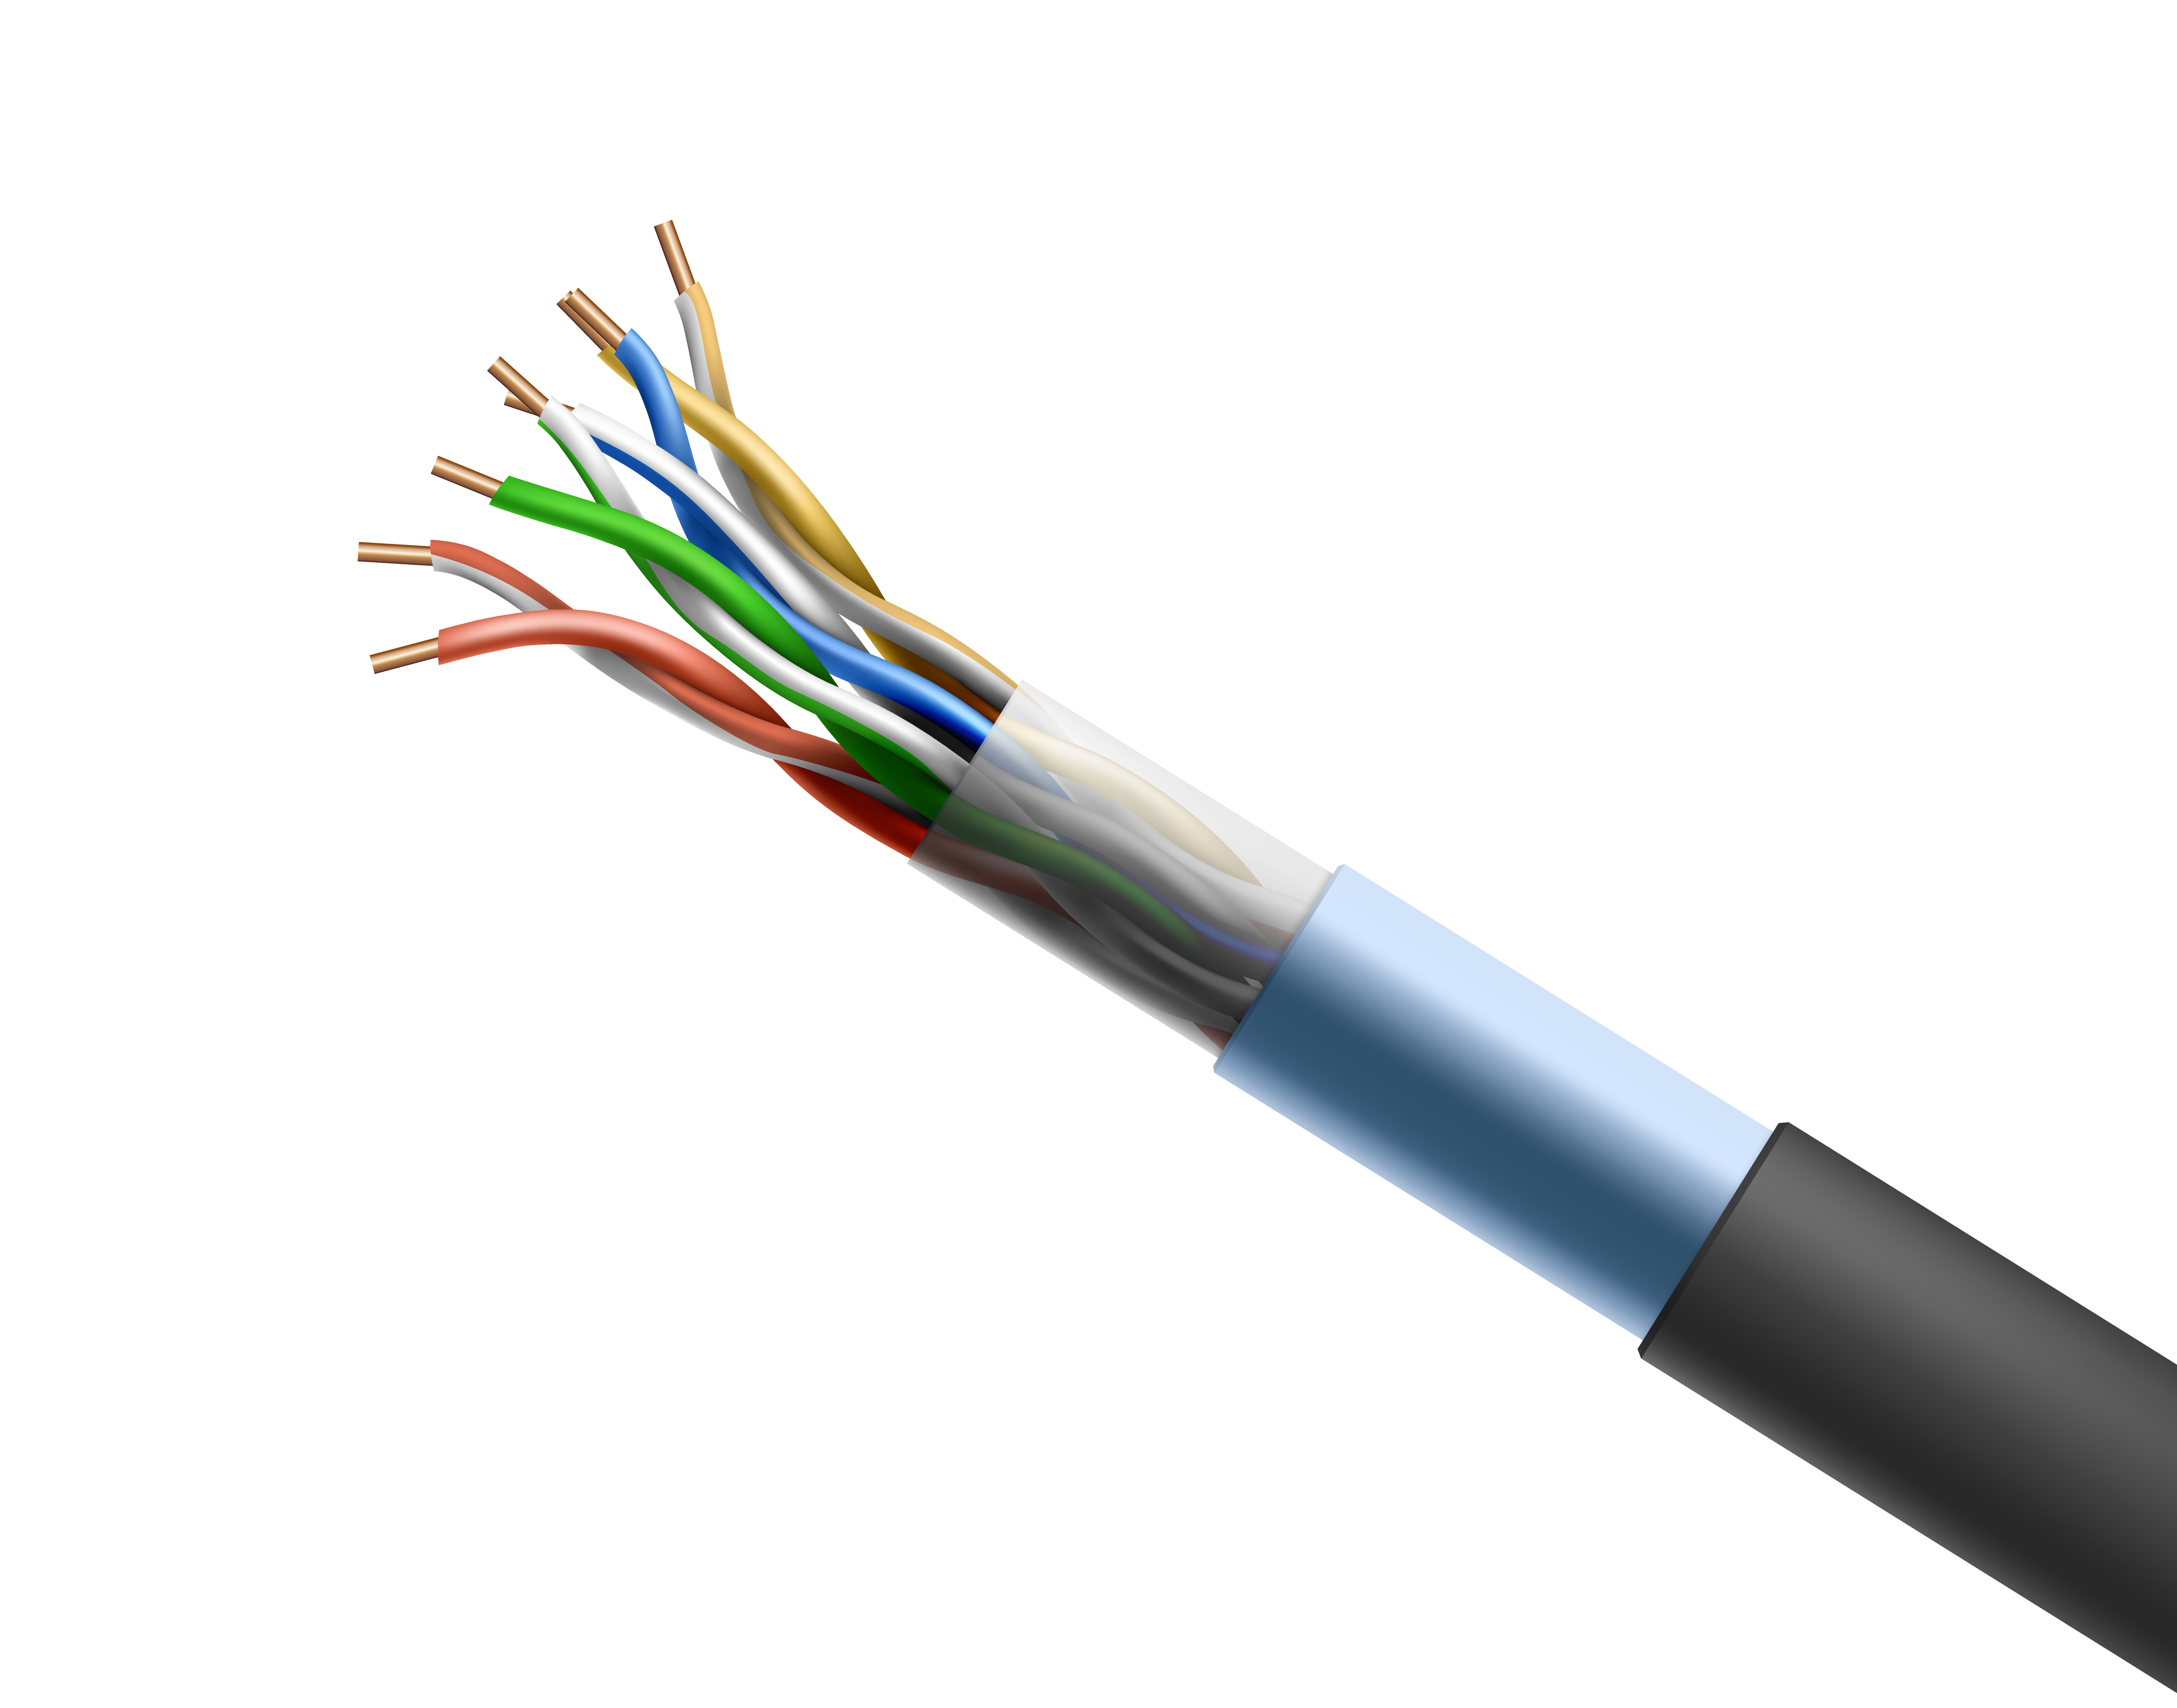 https://www.cables.com/blogimages/outfdoor-ethernet-cables_1627924084.jpg